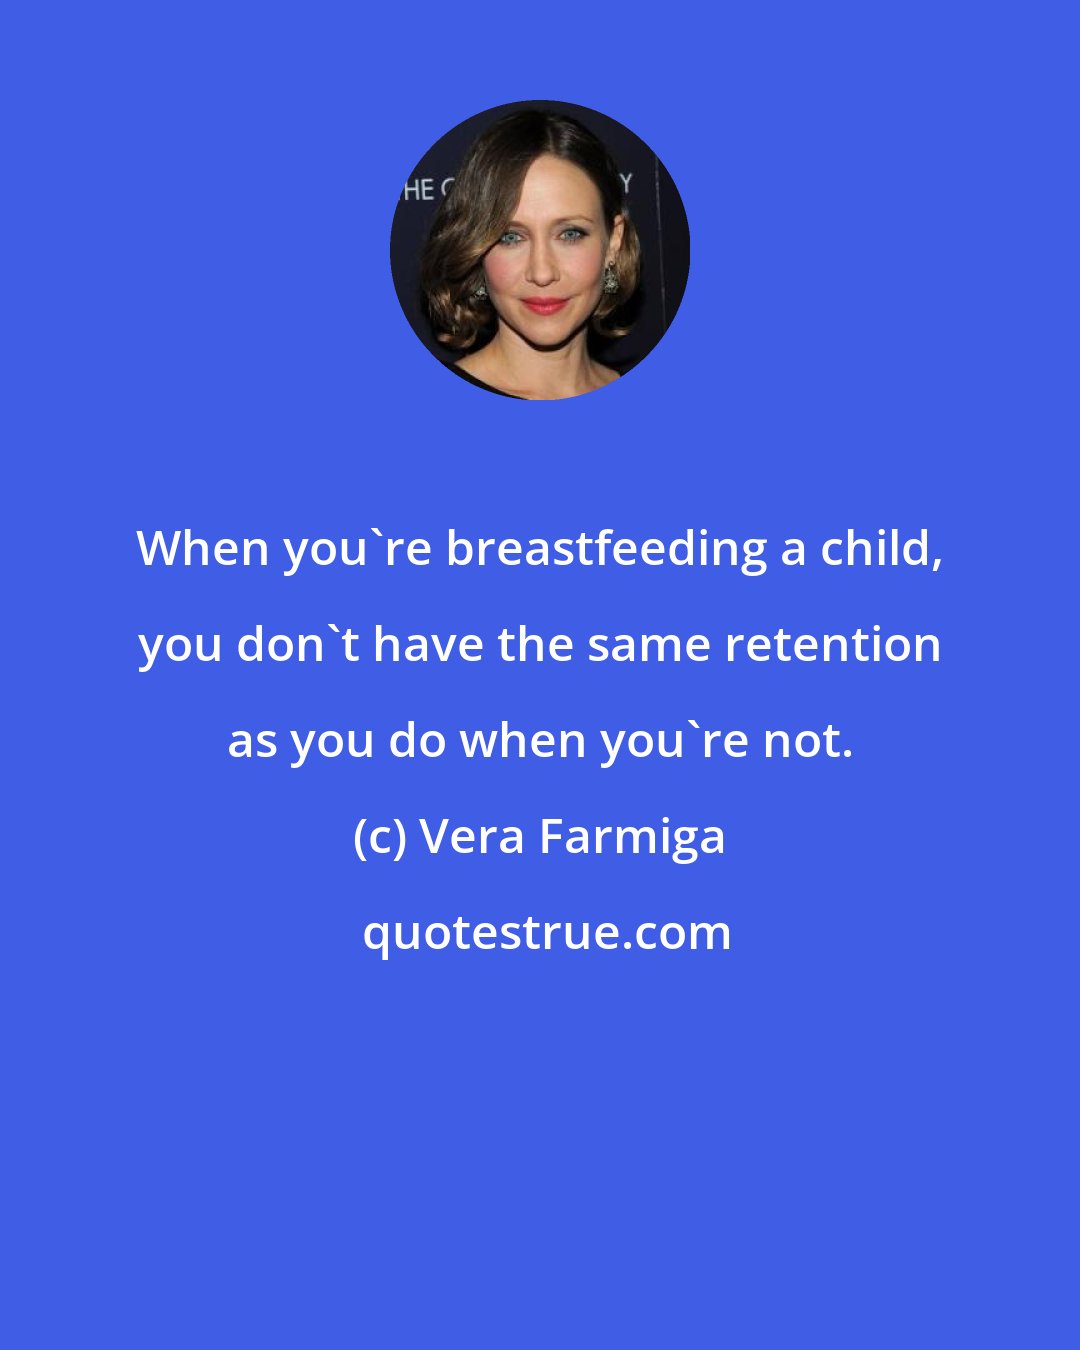 Vera Farmiga: When you're breastfeeding a child, you don't have the same retention as you do when you're not.